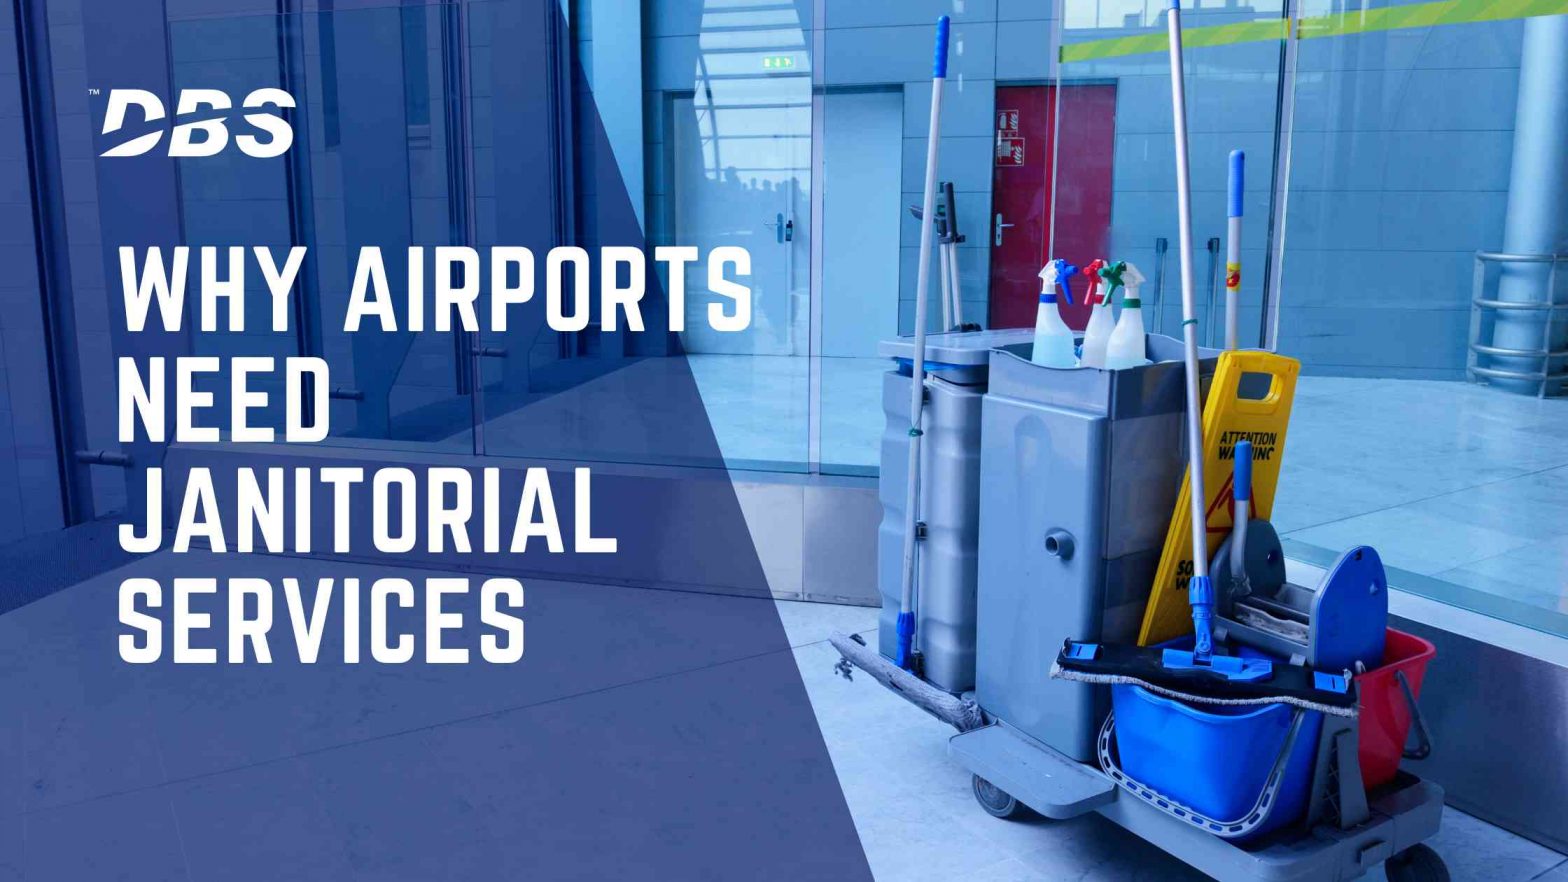 Janitorial Services for Airports